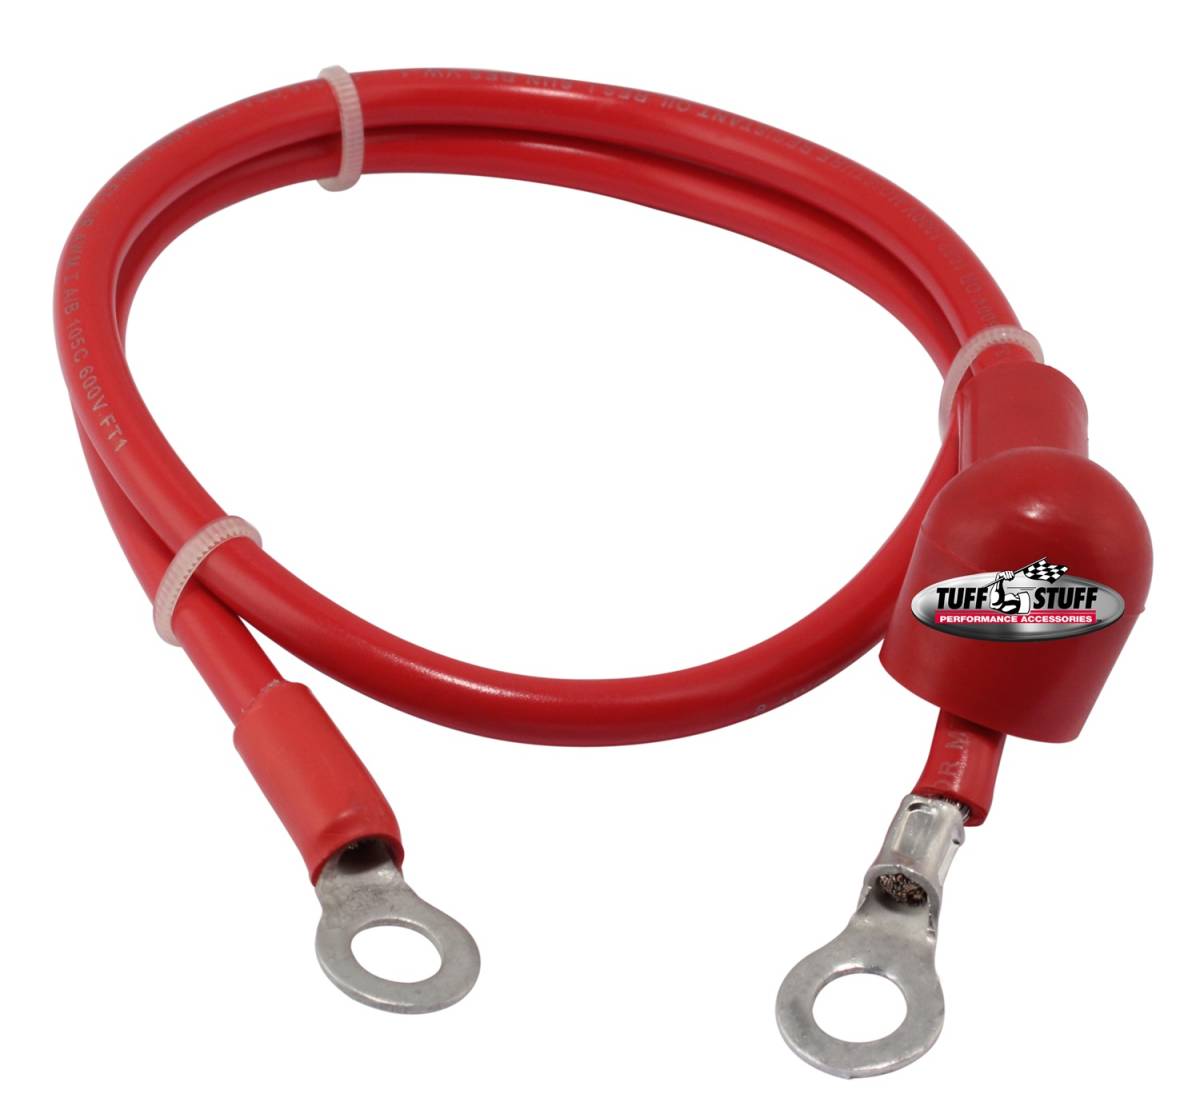 Tuff Stuff Performance - Alternator Replacement Heavy Duty Charge Wires Universal 1 Wire 8 Gauge Copper Terminated 24 in. Long Red 754624